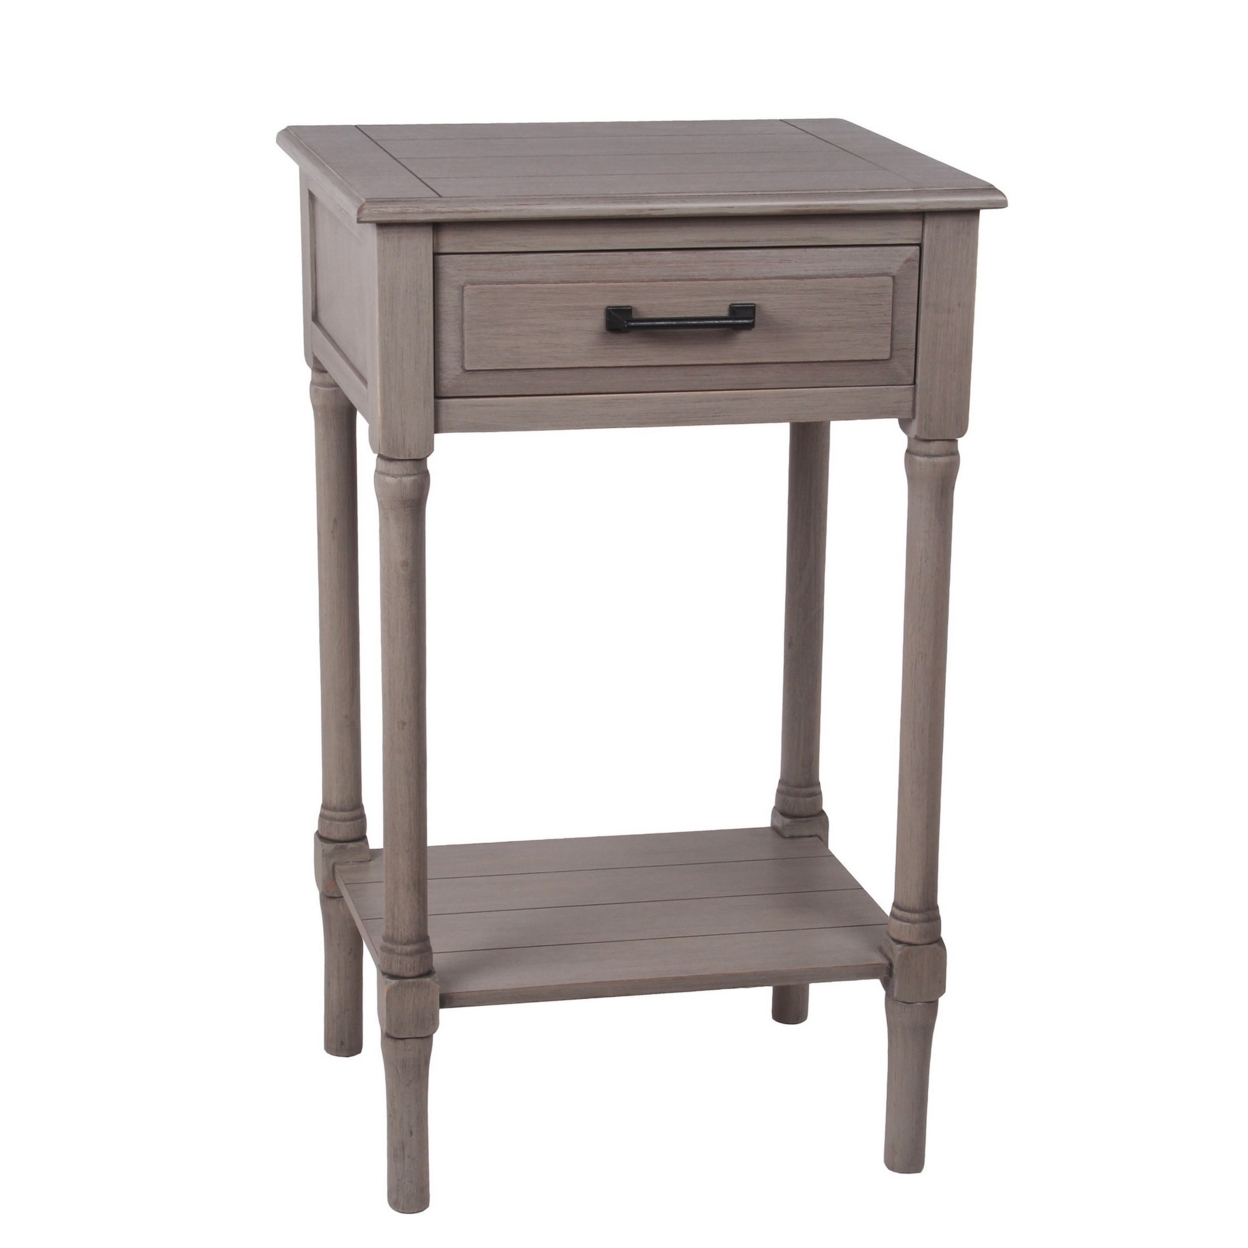 Jared 30 Inch Classic Accent End Table With Drawer And Shelf, Rich Brown- Saltoro Sherpi